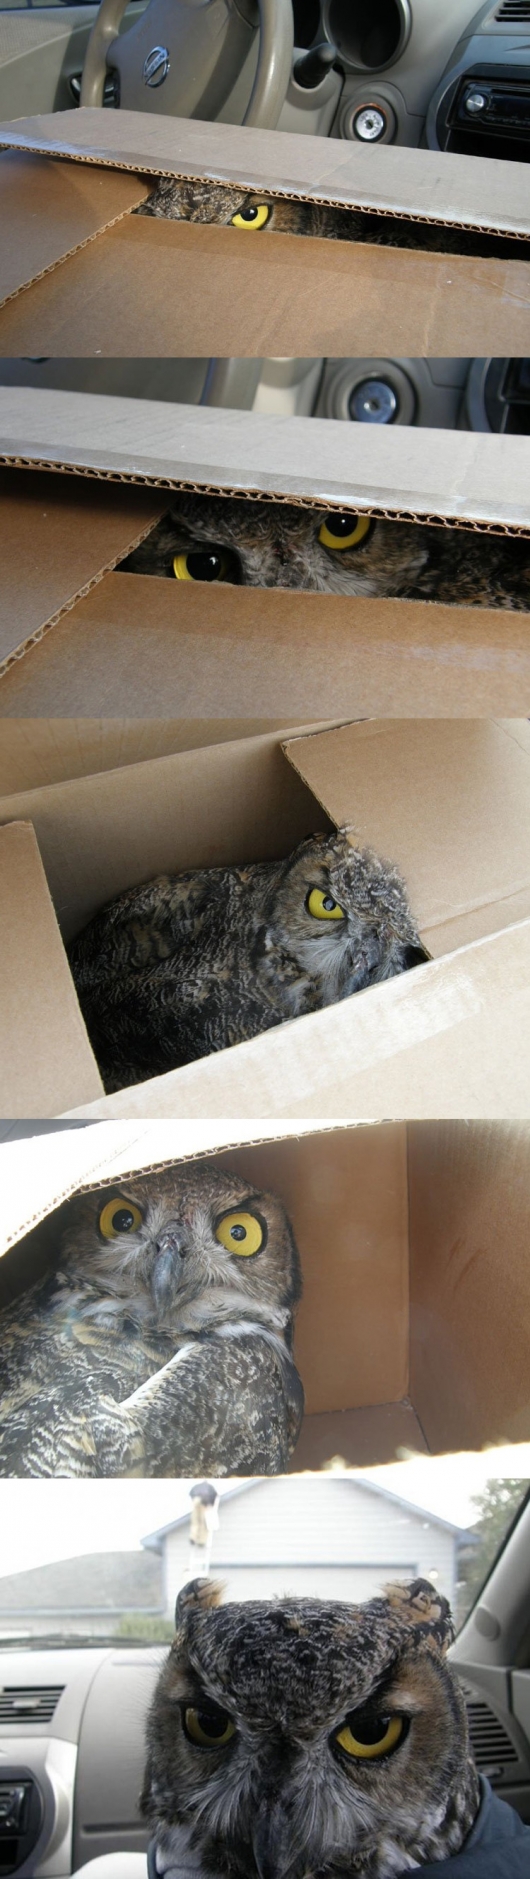 Owl from a box